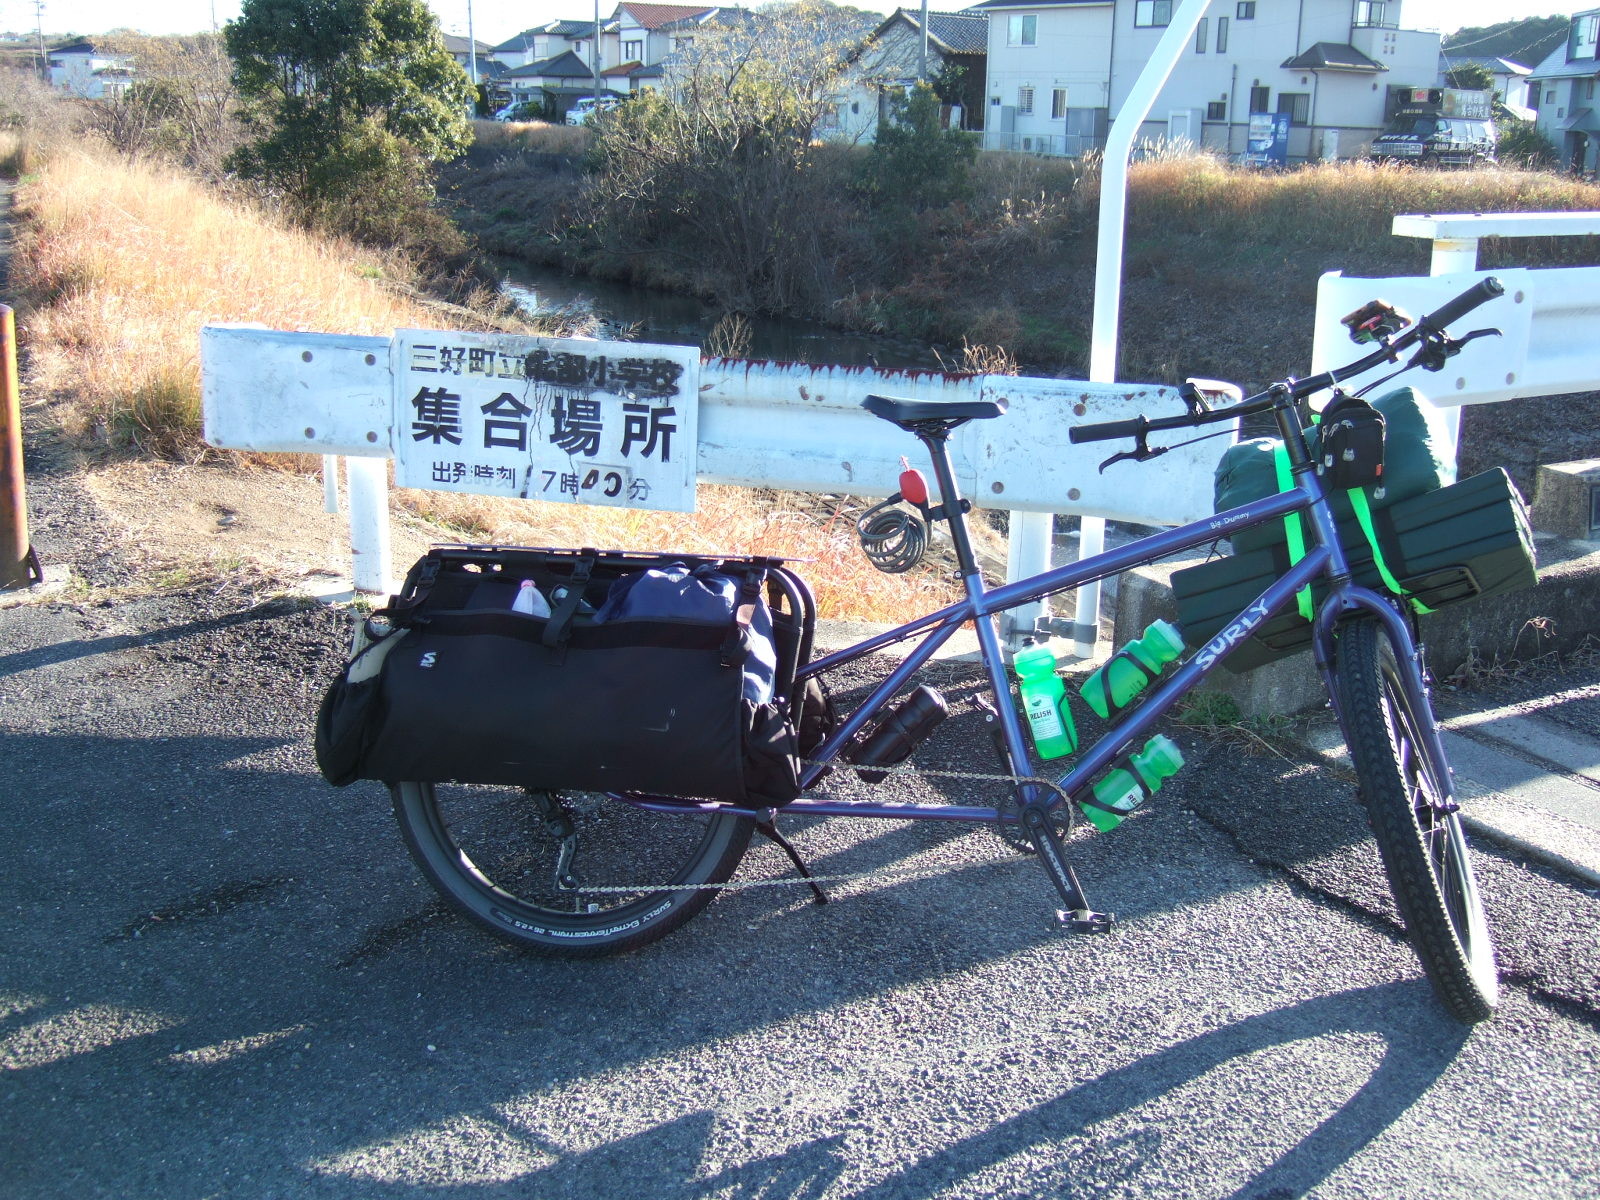 A loaded cargo bicycle parked at a bridge over an earthen canal with trees and dried grass on the banks. A sign on a guardrail behind the bike is partly obscured by black spray paint over the school name, but seems to read “Miyoshi North District County Elementary School/Gathering Point/Departure Time 7:40” (三好町立北部小学校・集合場所・出発時間７時４０分). Not sure what the reason for the splotch of black paint is, but the sign must be at least 13 years old, since Miyoshi County became Miyoshi City in 2010.